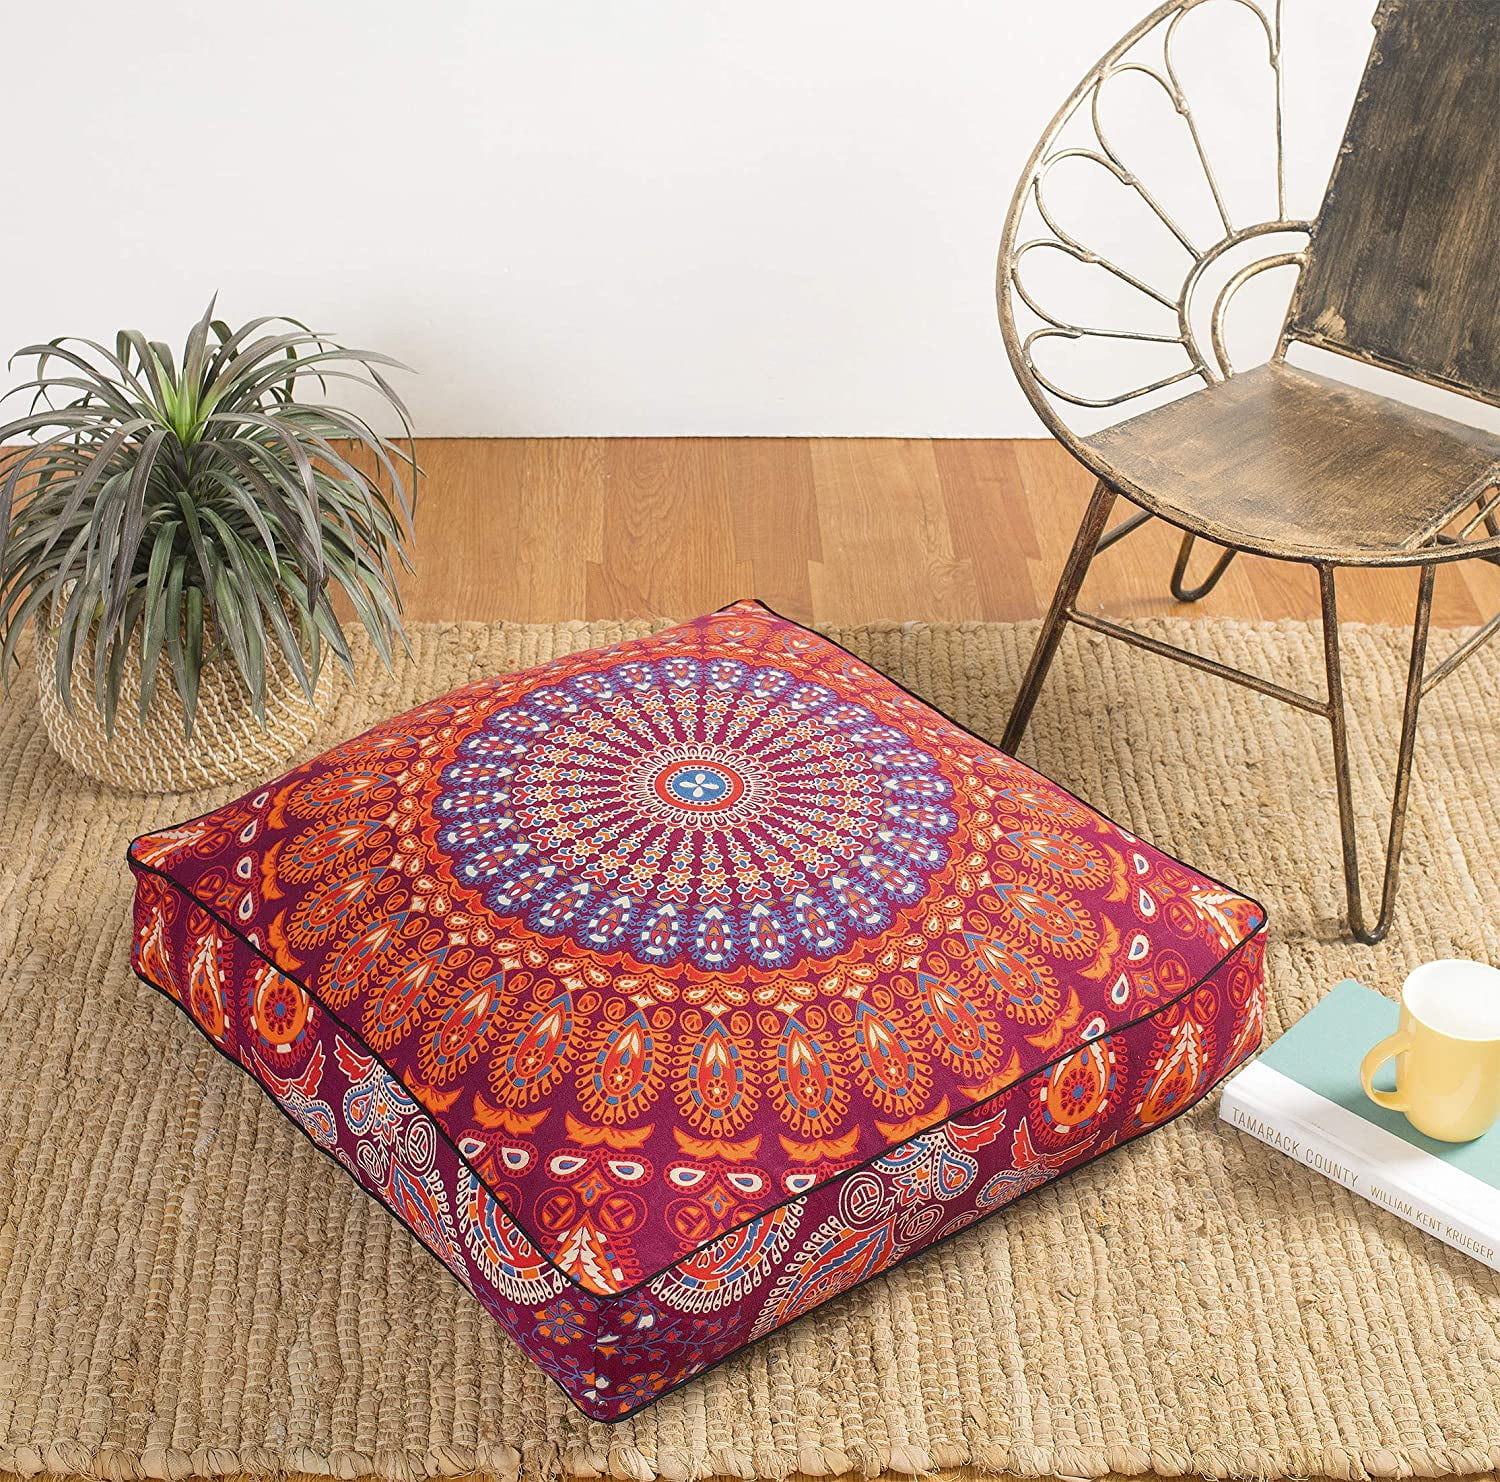 12 PCs PEACOCK MANDALA INDIAN FLOOR PILLOW SQUARE SEATING OTTOMAN POUF COVER 35" 